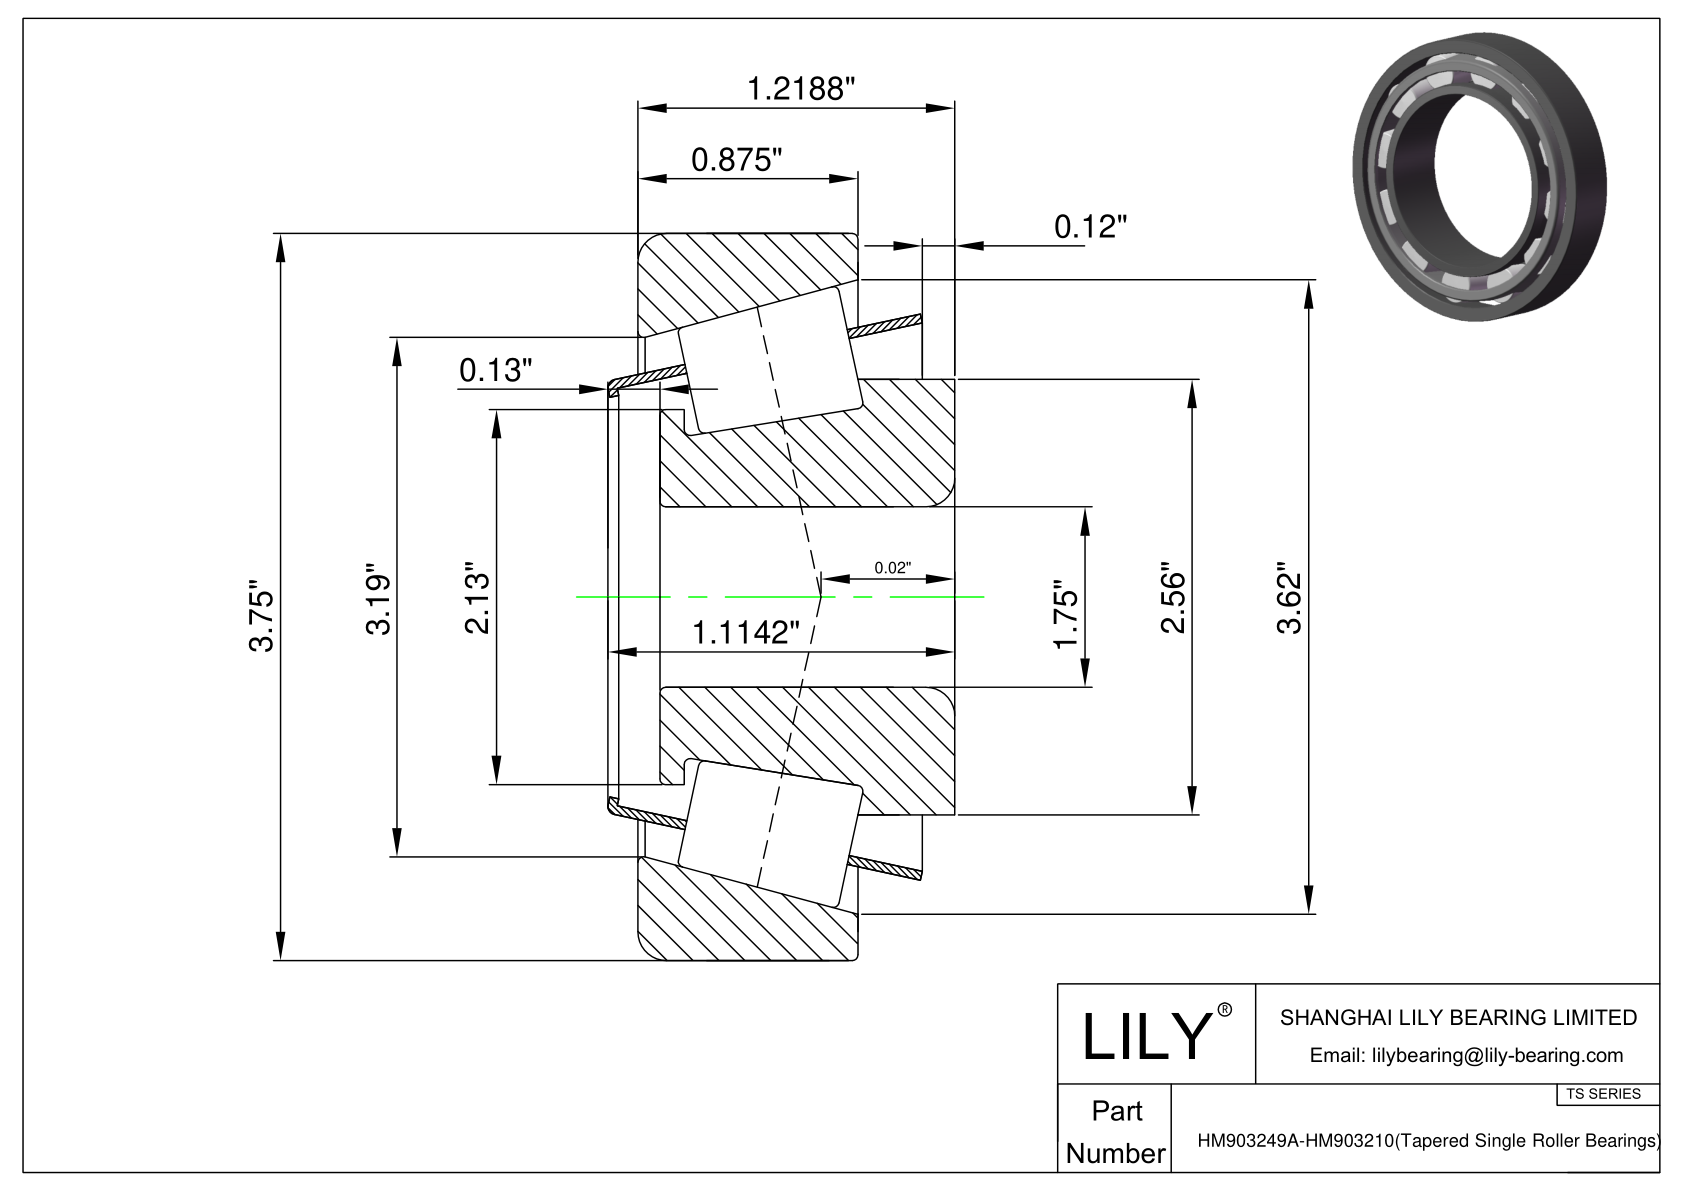 HM903249A-HM903210 TS (Tapered Single Roller Bearings) (Imperial) cad drawing